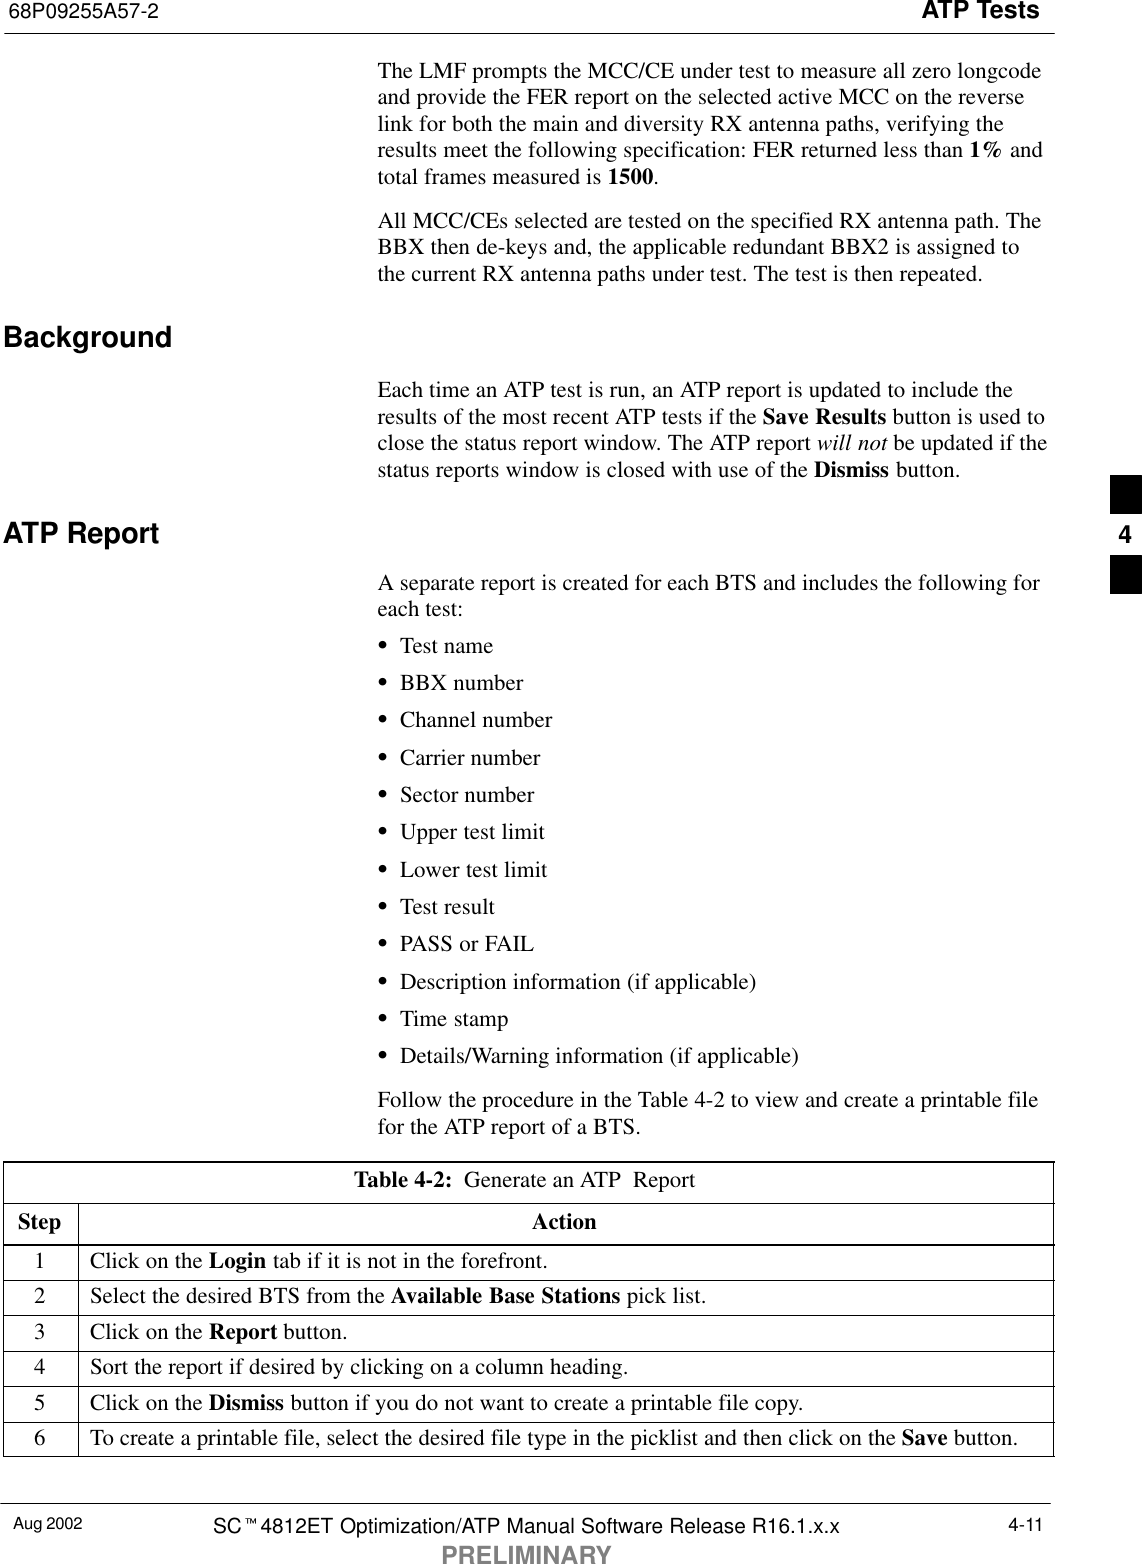 ATP Tests68P09255A57-2Aug 2002 SCt4812ET Optimization/ATP Manual Software Release R16.1.x.xPRELIMINARY4-11The LMF prompts the MCC/CE under test to measure all zero longcodeand provide the FER report on the selected active MCC on the reverselink for both the main and diversity RX antenna paths, verifying theresults meet the following specification: FER returned less than 1% andtotal frames measured is 1500.All MCC/CEs selected are tested on the specified RX antenna path. TheBBX then de-keys and, the applicable redundant BBX2 is assigned tothe current RX antenna paths under test. The test is then repeated.BackgroundEach time an ATP test is run, an ATP report is updated to include theresults of the most recent ATP tests if the Save Results button is used toclose the status report window. The ATP report will not be updated if thestatus reports window is closed with use of the Dismiss button.ATP ReportA separate report is created for each BTS and includes the following foreach test:STest nameSBBX numberSChannel numberSCarrier numberSSector numberSUpper test limitSLower test limitSTest resultSPASS or FAILSDescription information (if applicable)STime stampSDetails/Warning information (if applicable)Follow the procedure in the Table 4-2 to view and create a printable filefor the ATP report of a BTS.Table 4-2:  Generate an ATP  Report Step Action1Click on the Login tab if it is not in the forefront.2Select the desired BTS from the Available Base Stations pick list.3Click on the Report button.4Sort the report if desired by clicking on a column heading.5Click on the Dismiss button if you do not want to create a printable file copy.6To create a printable file, select the desired file type in the picklist and then click on the Save button. 4